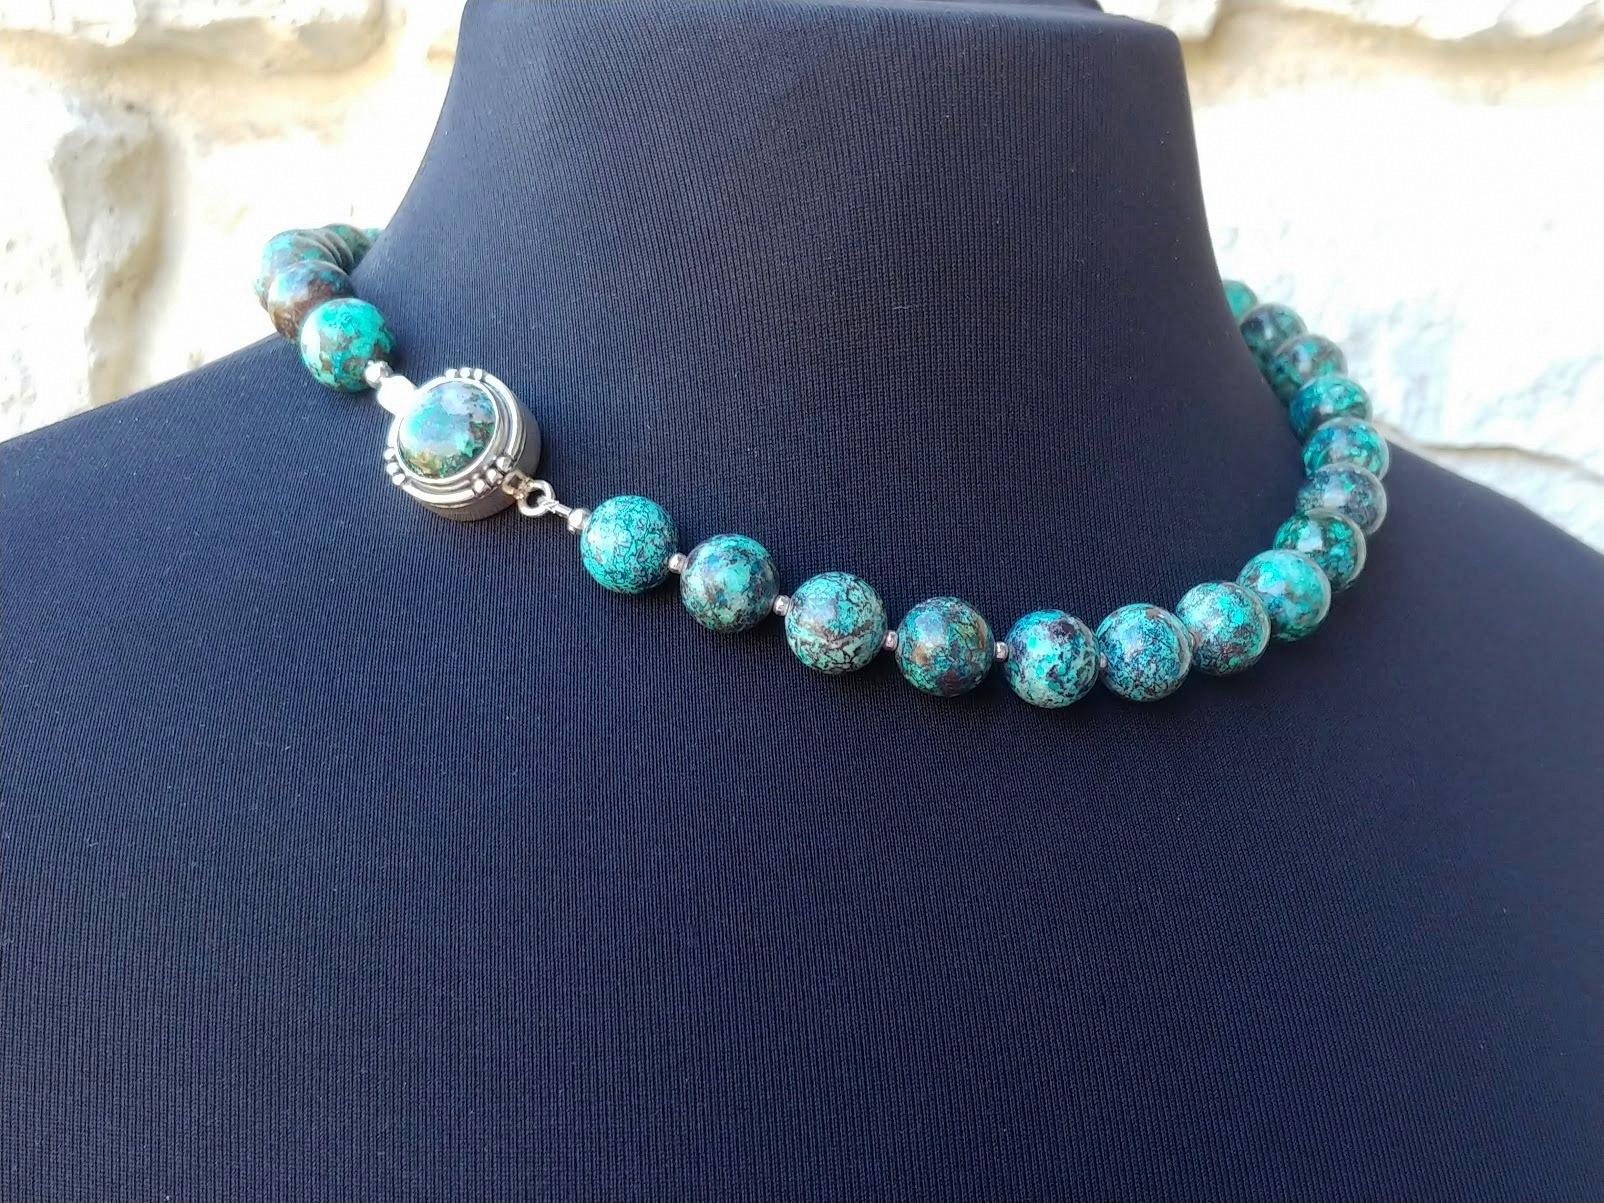 Arizona Shattuckite Necklace In Excellent Condition For Sale In Chesterland, OH